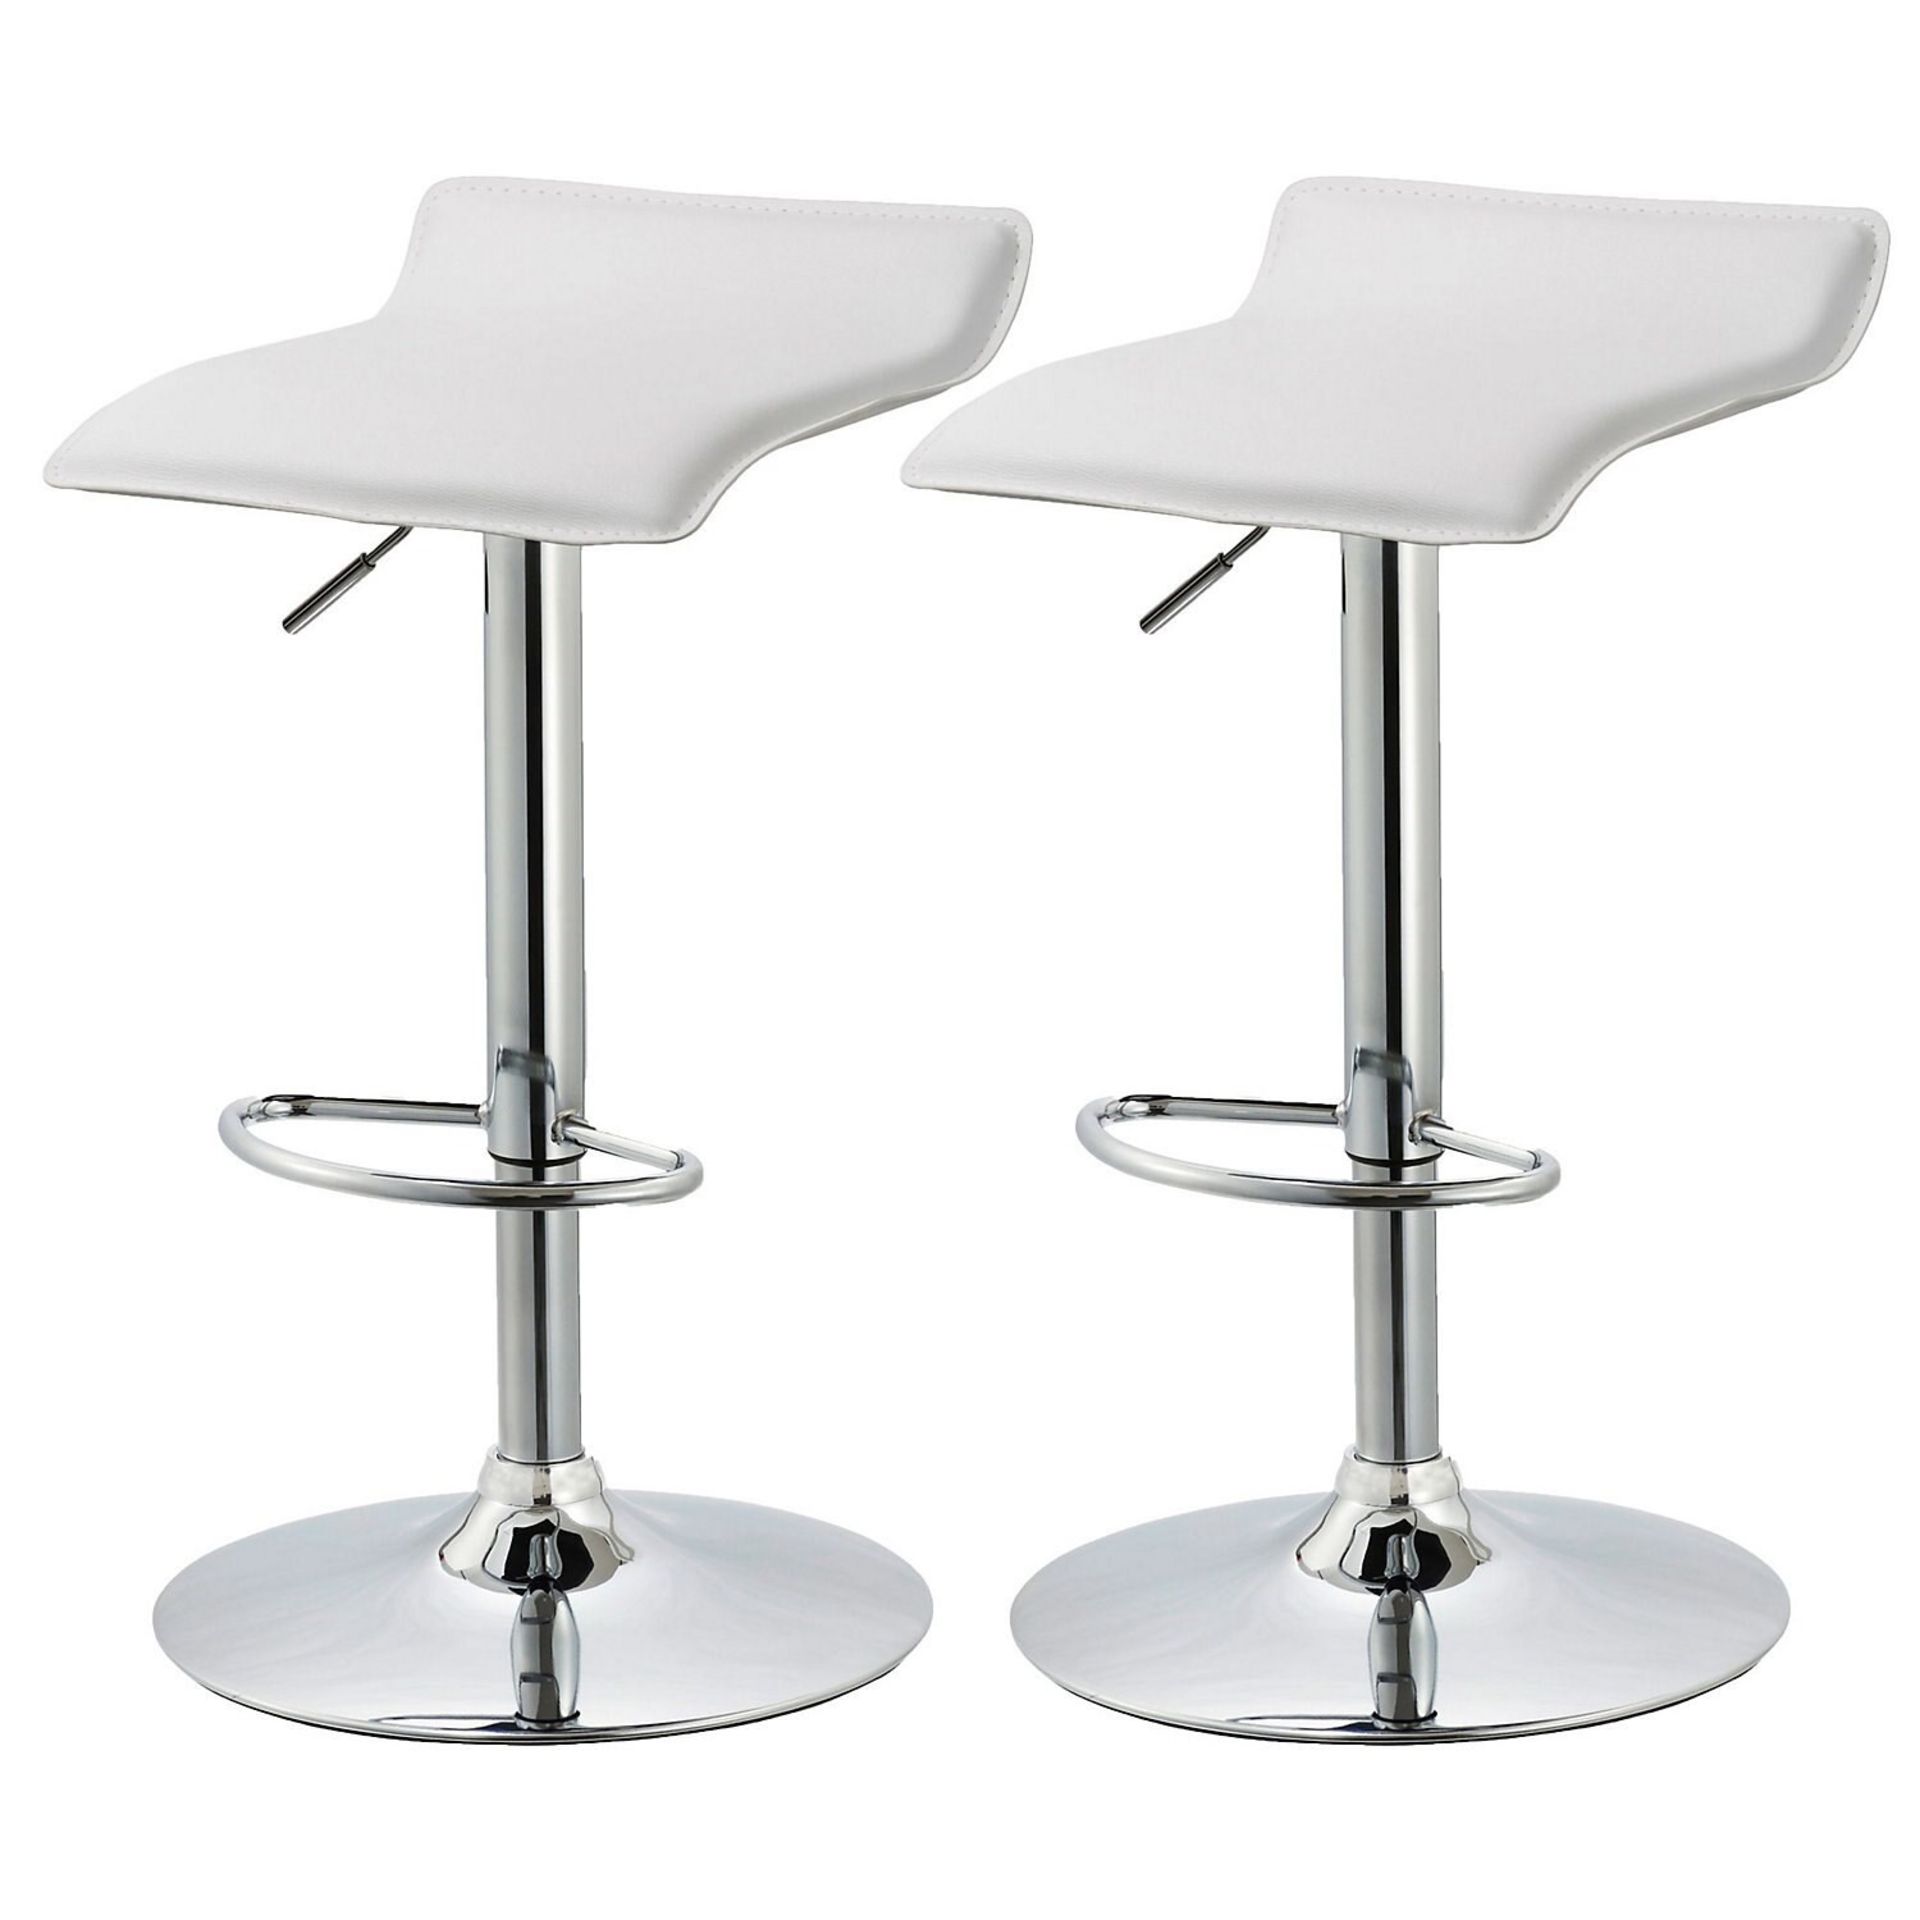 2 x White & Chrome effect Bar stool (H)850mm (W)415mm, Pack of 2.Bar Stools are a great way to ... - Image 2 of 2